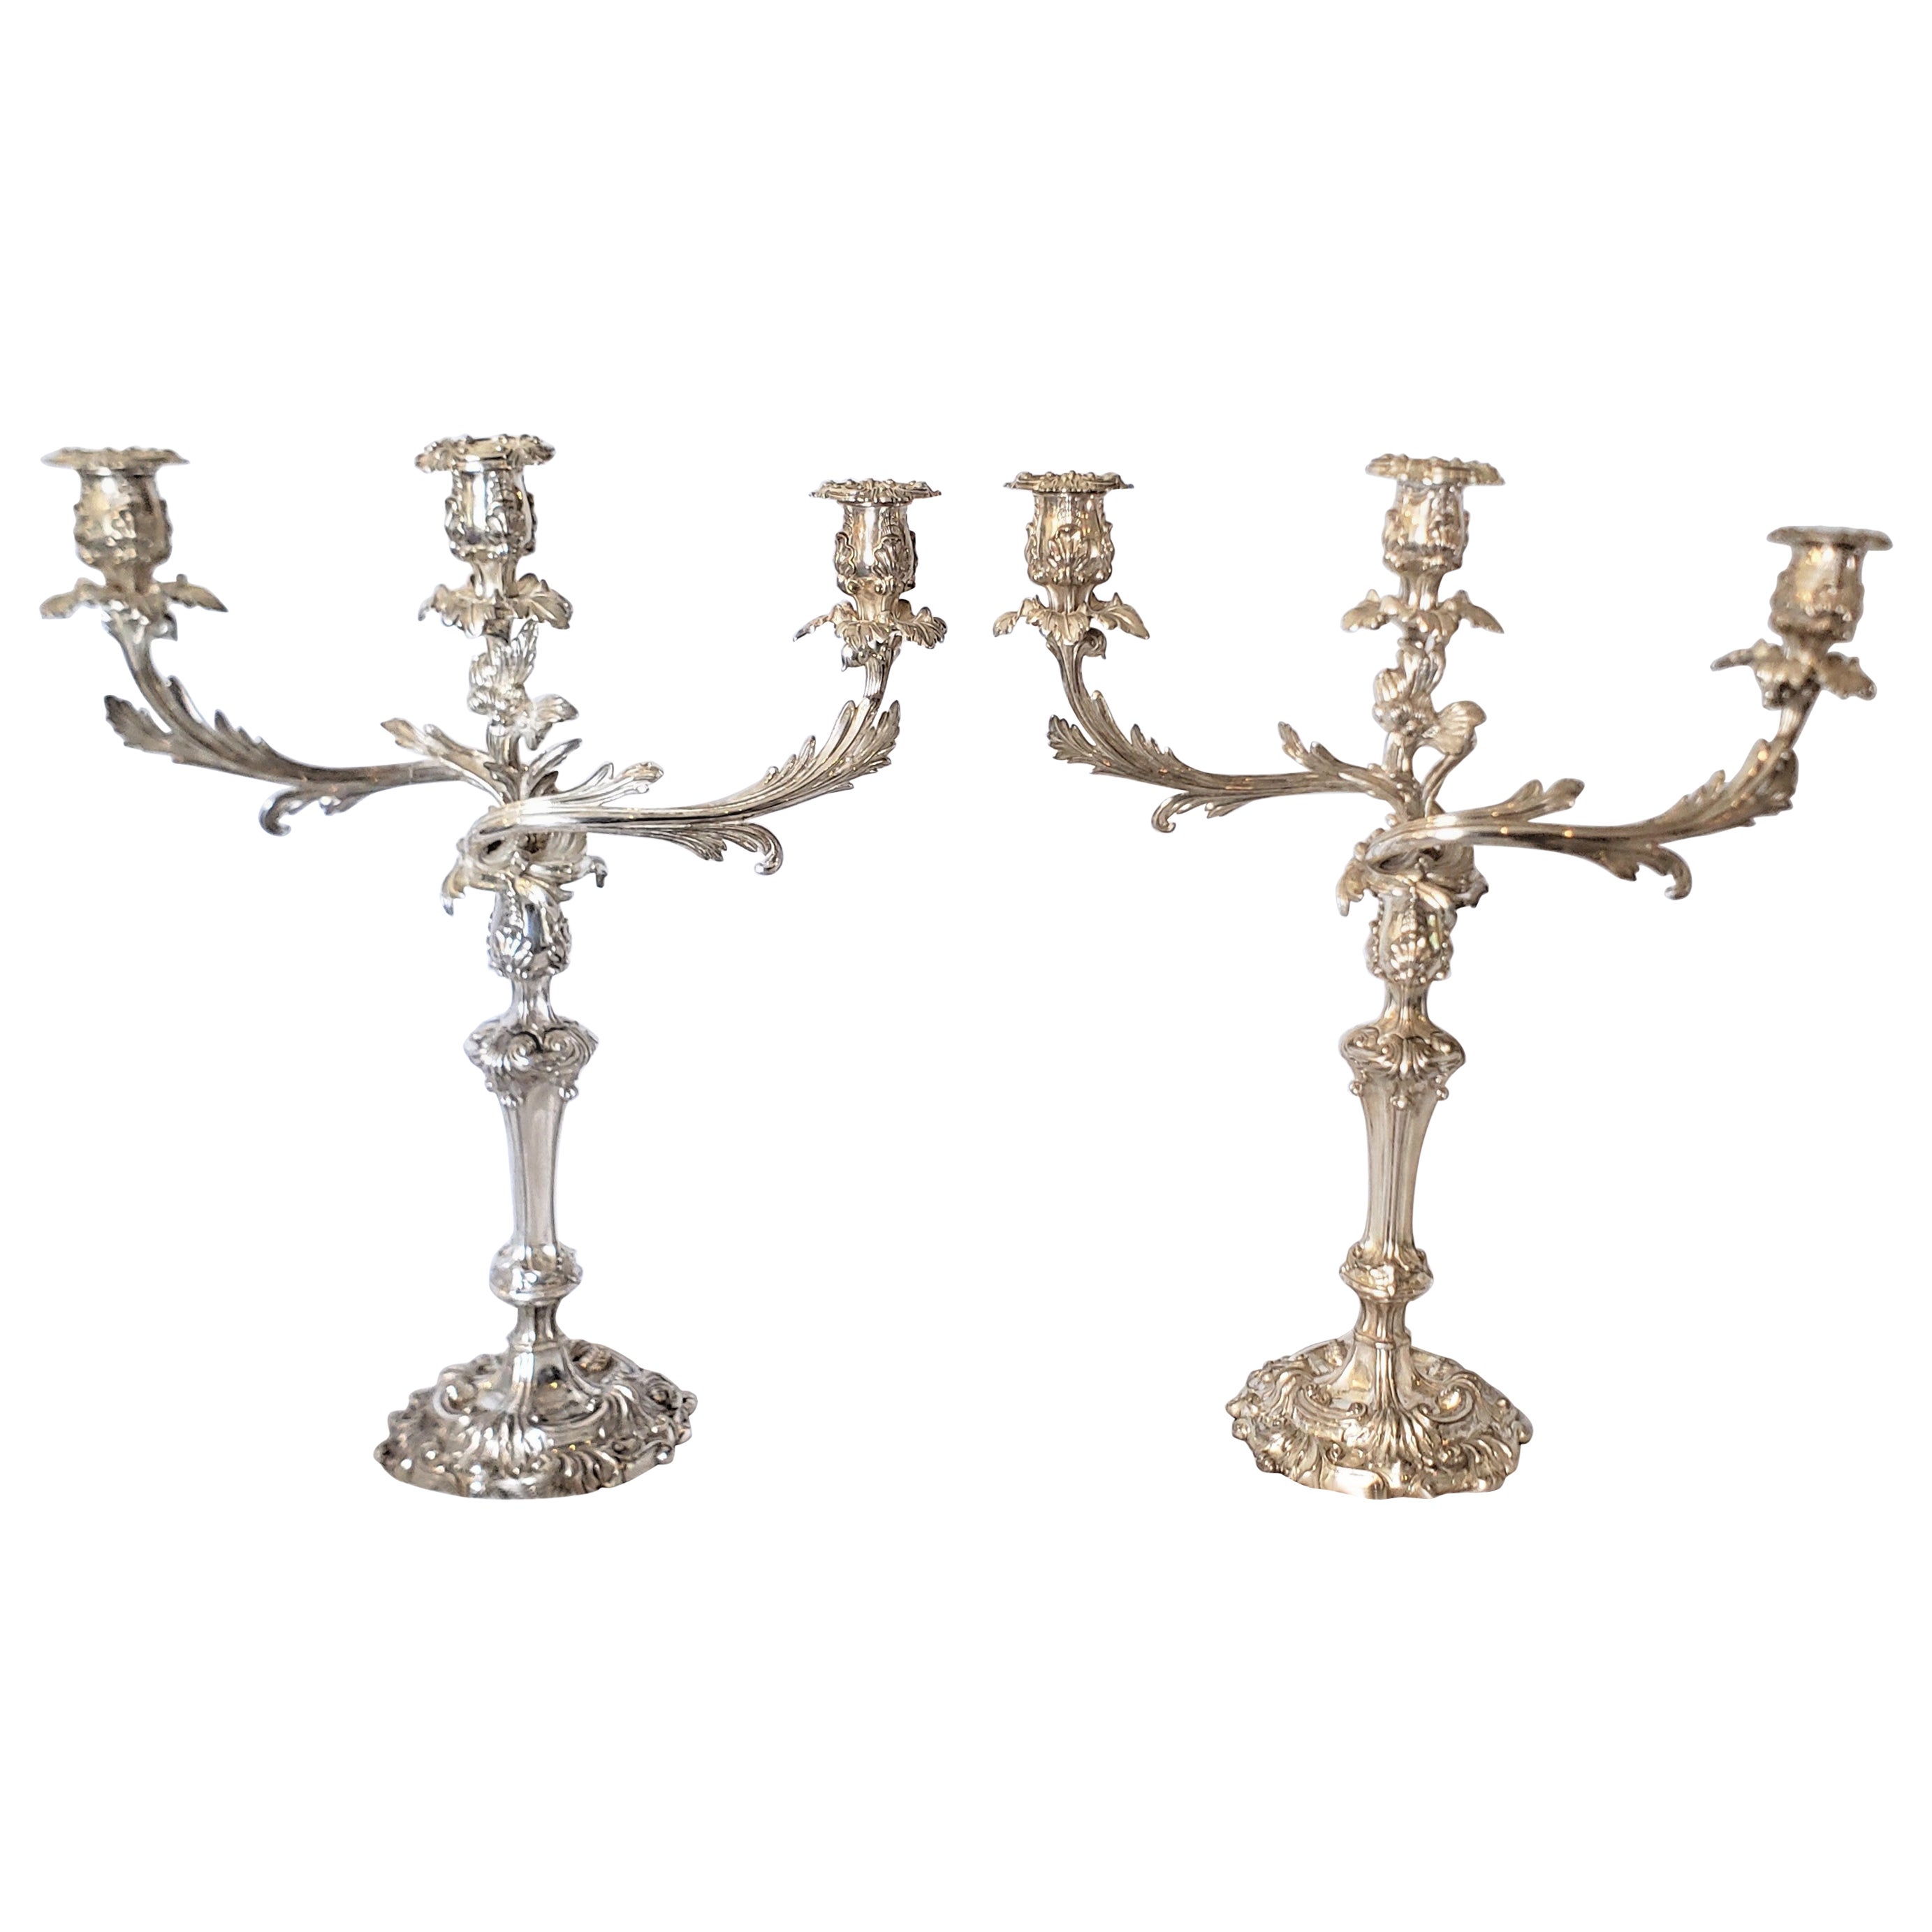 Pair of Antique Sheffield Plate Convertible 3 Branch Candlesticks or Candelabra